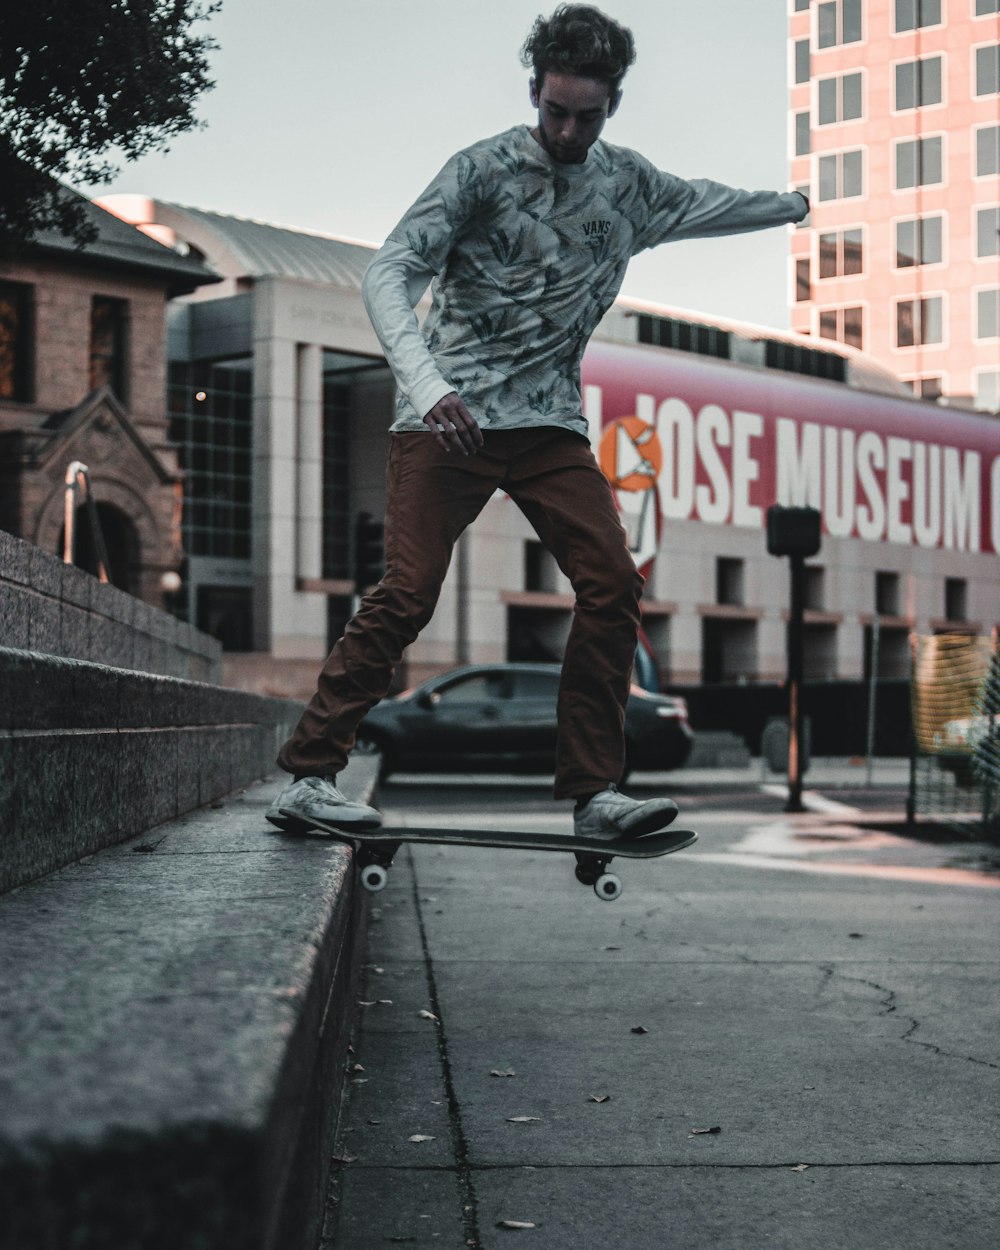 man playing skateboard on staircase